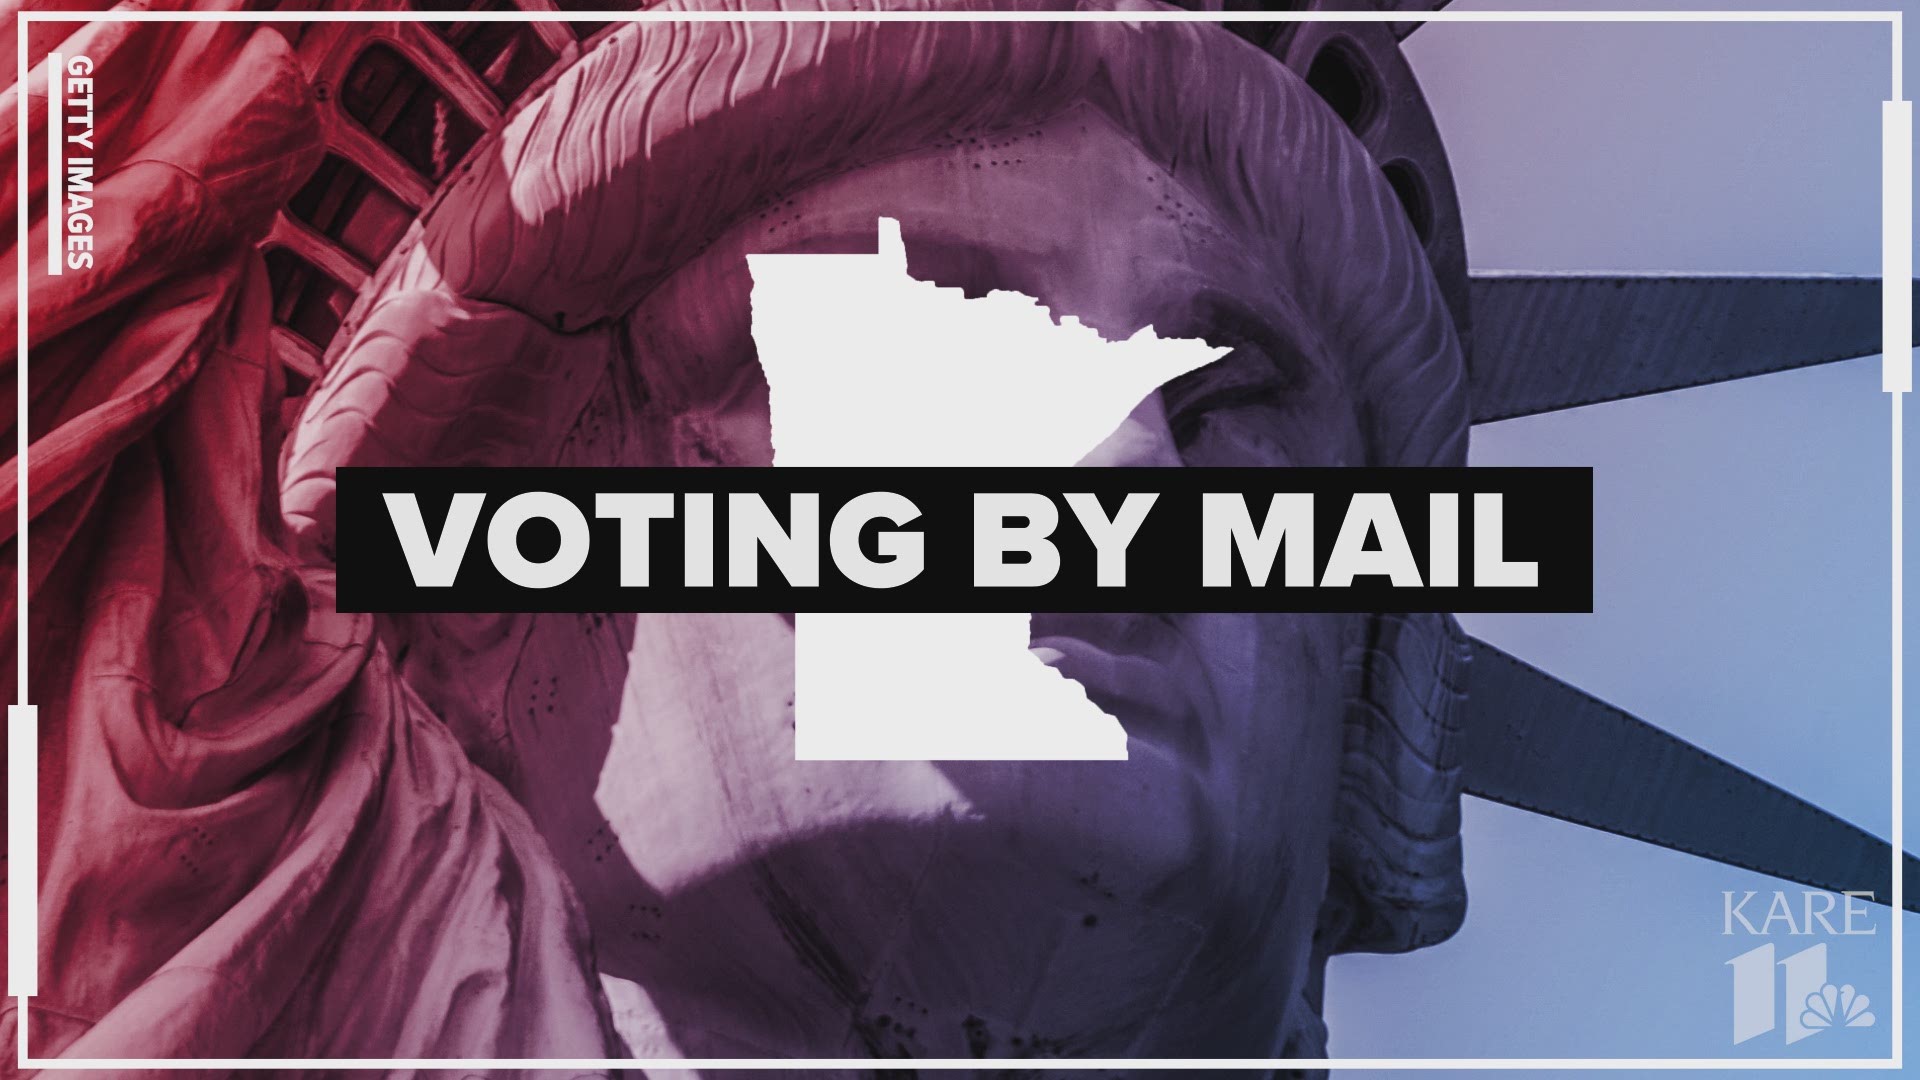 With an election year and pandemic in full swing, here is everything you need to know about voting by mail in Minnesota.